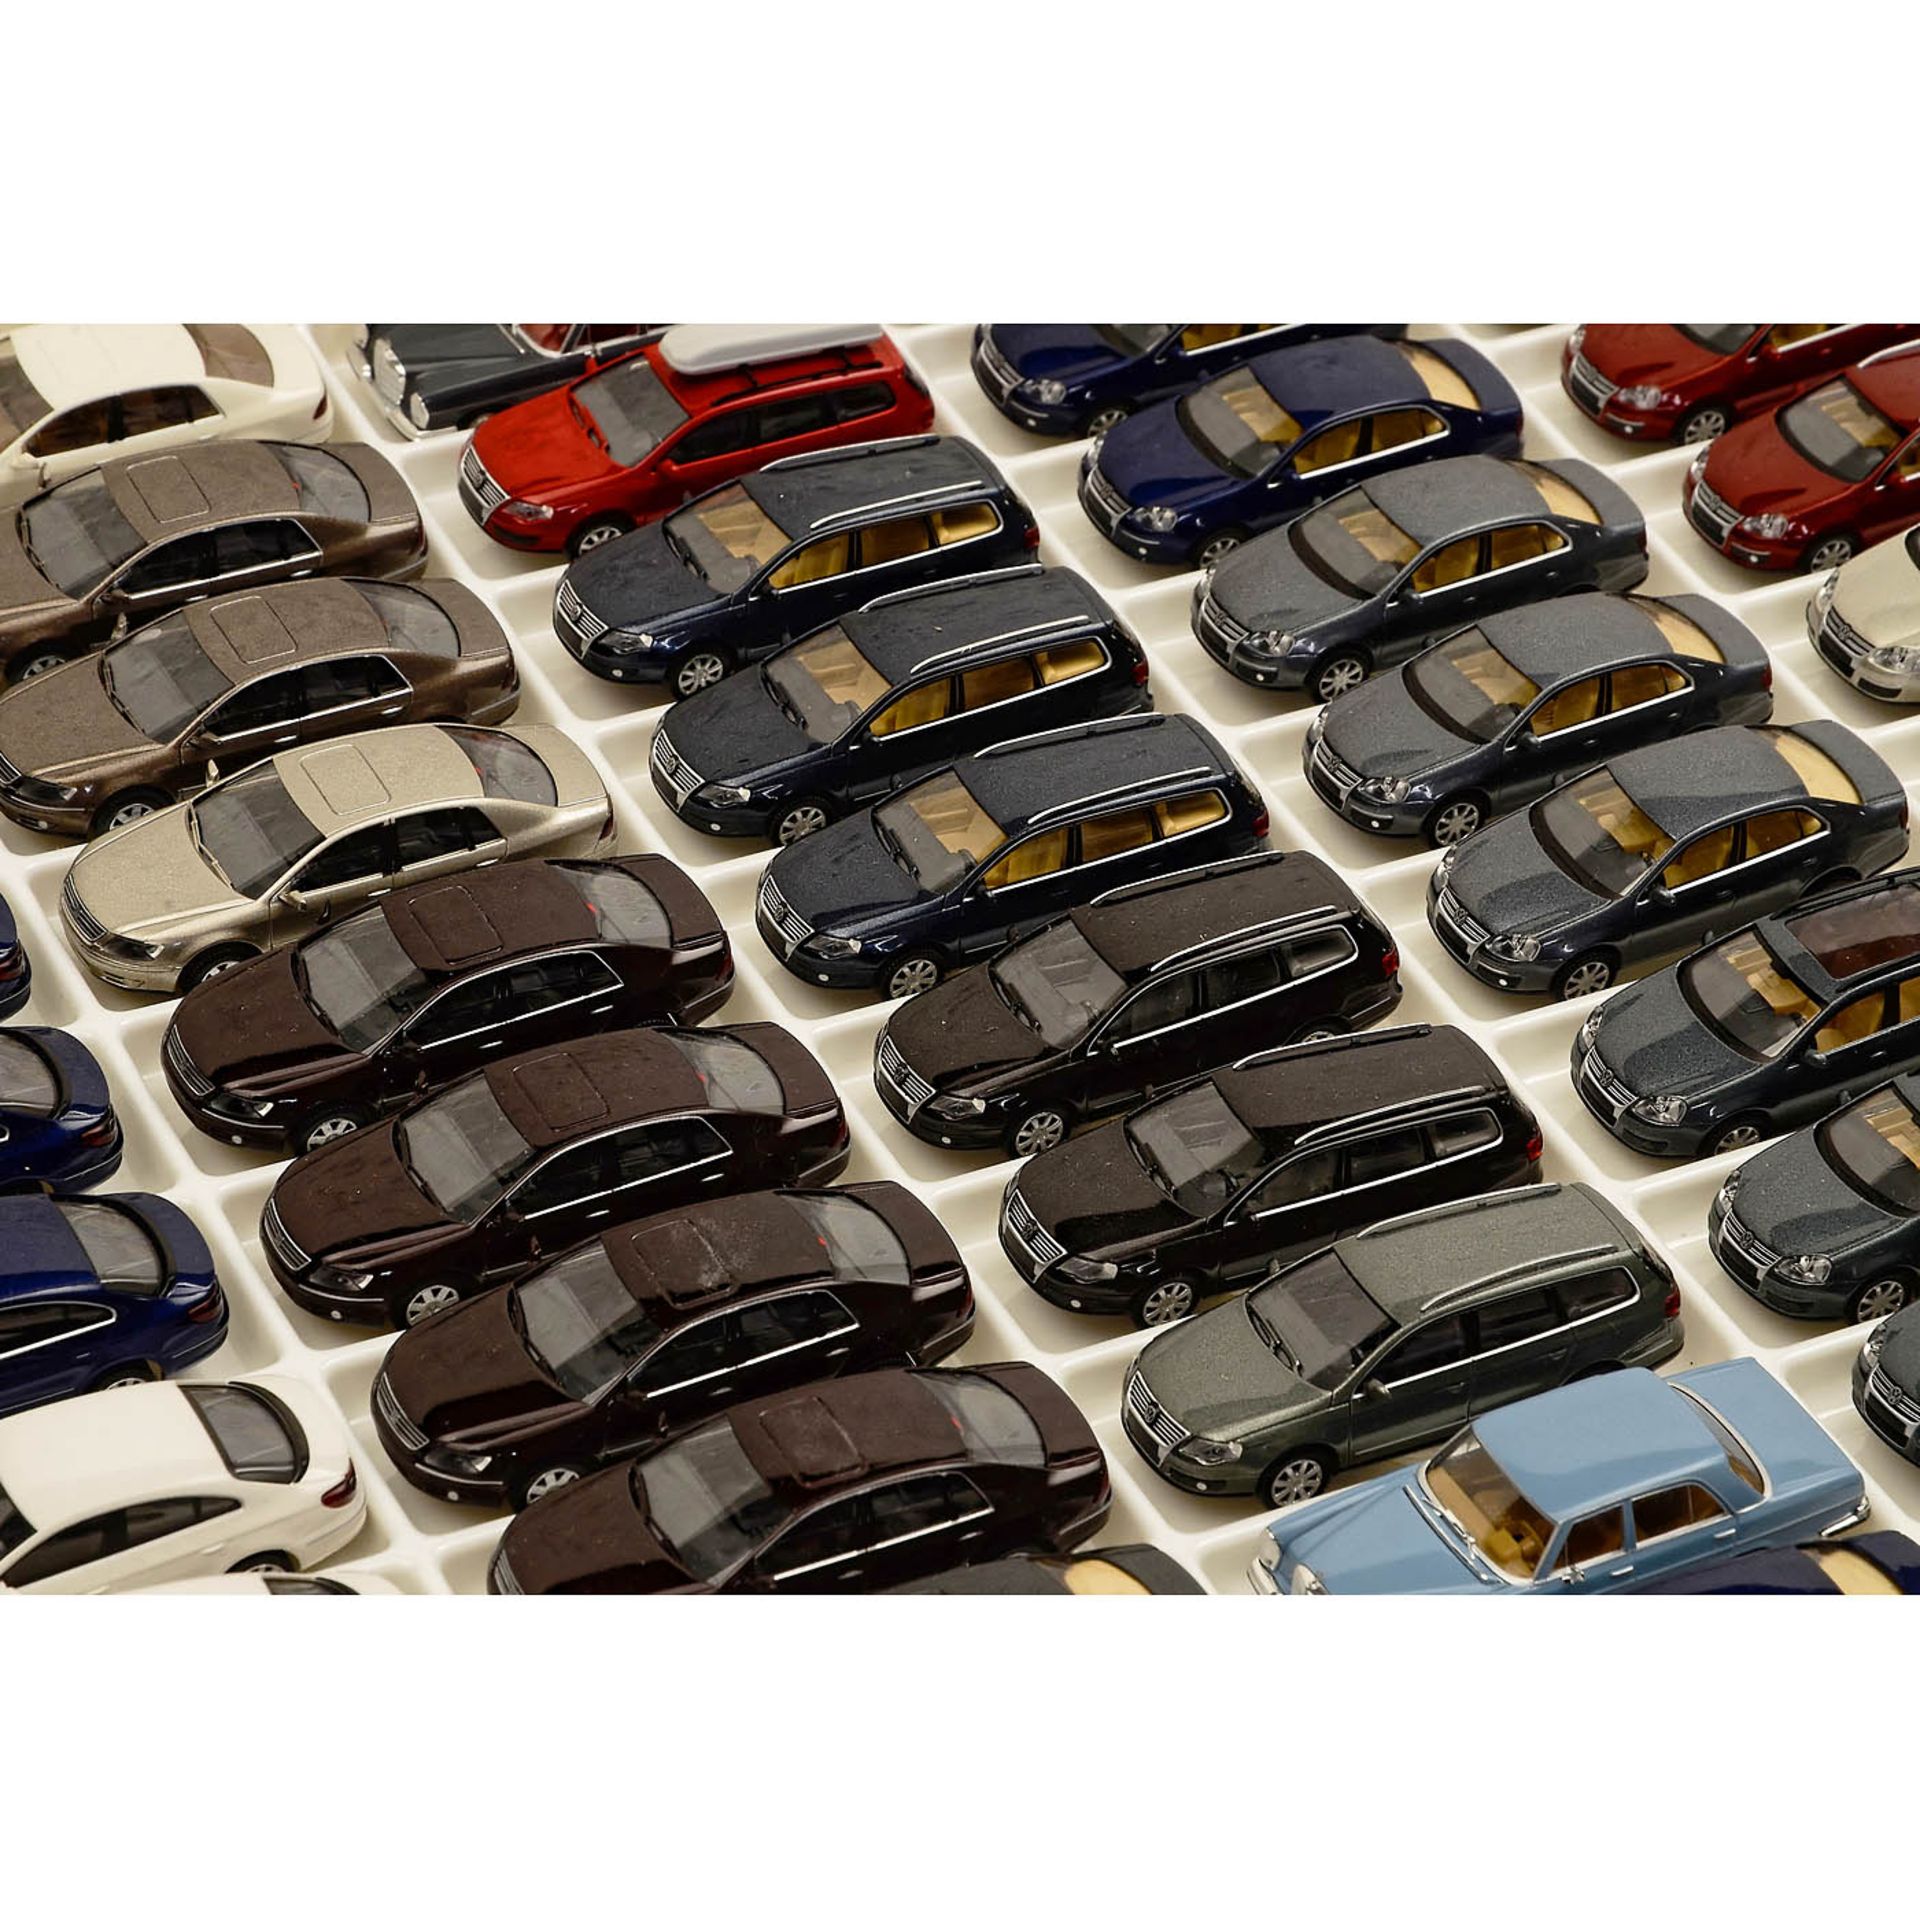 Large Collection of 1:87 Scale Model Cars - Image 5 of 9